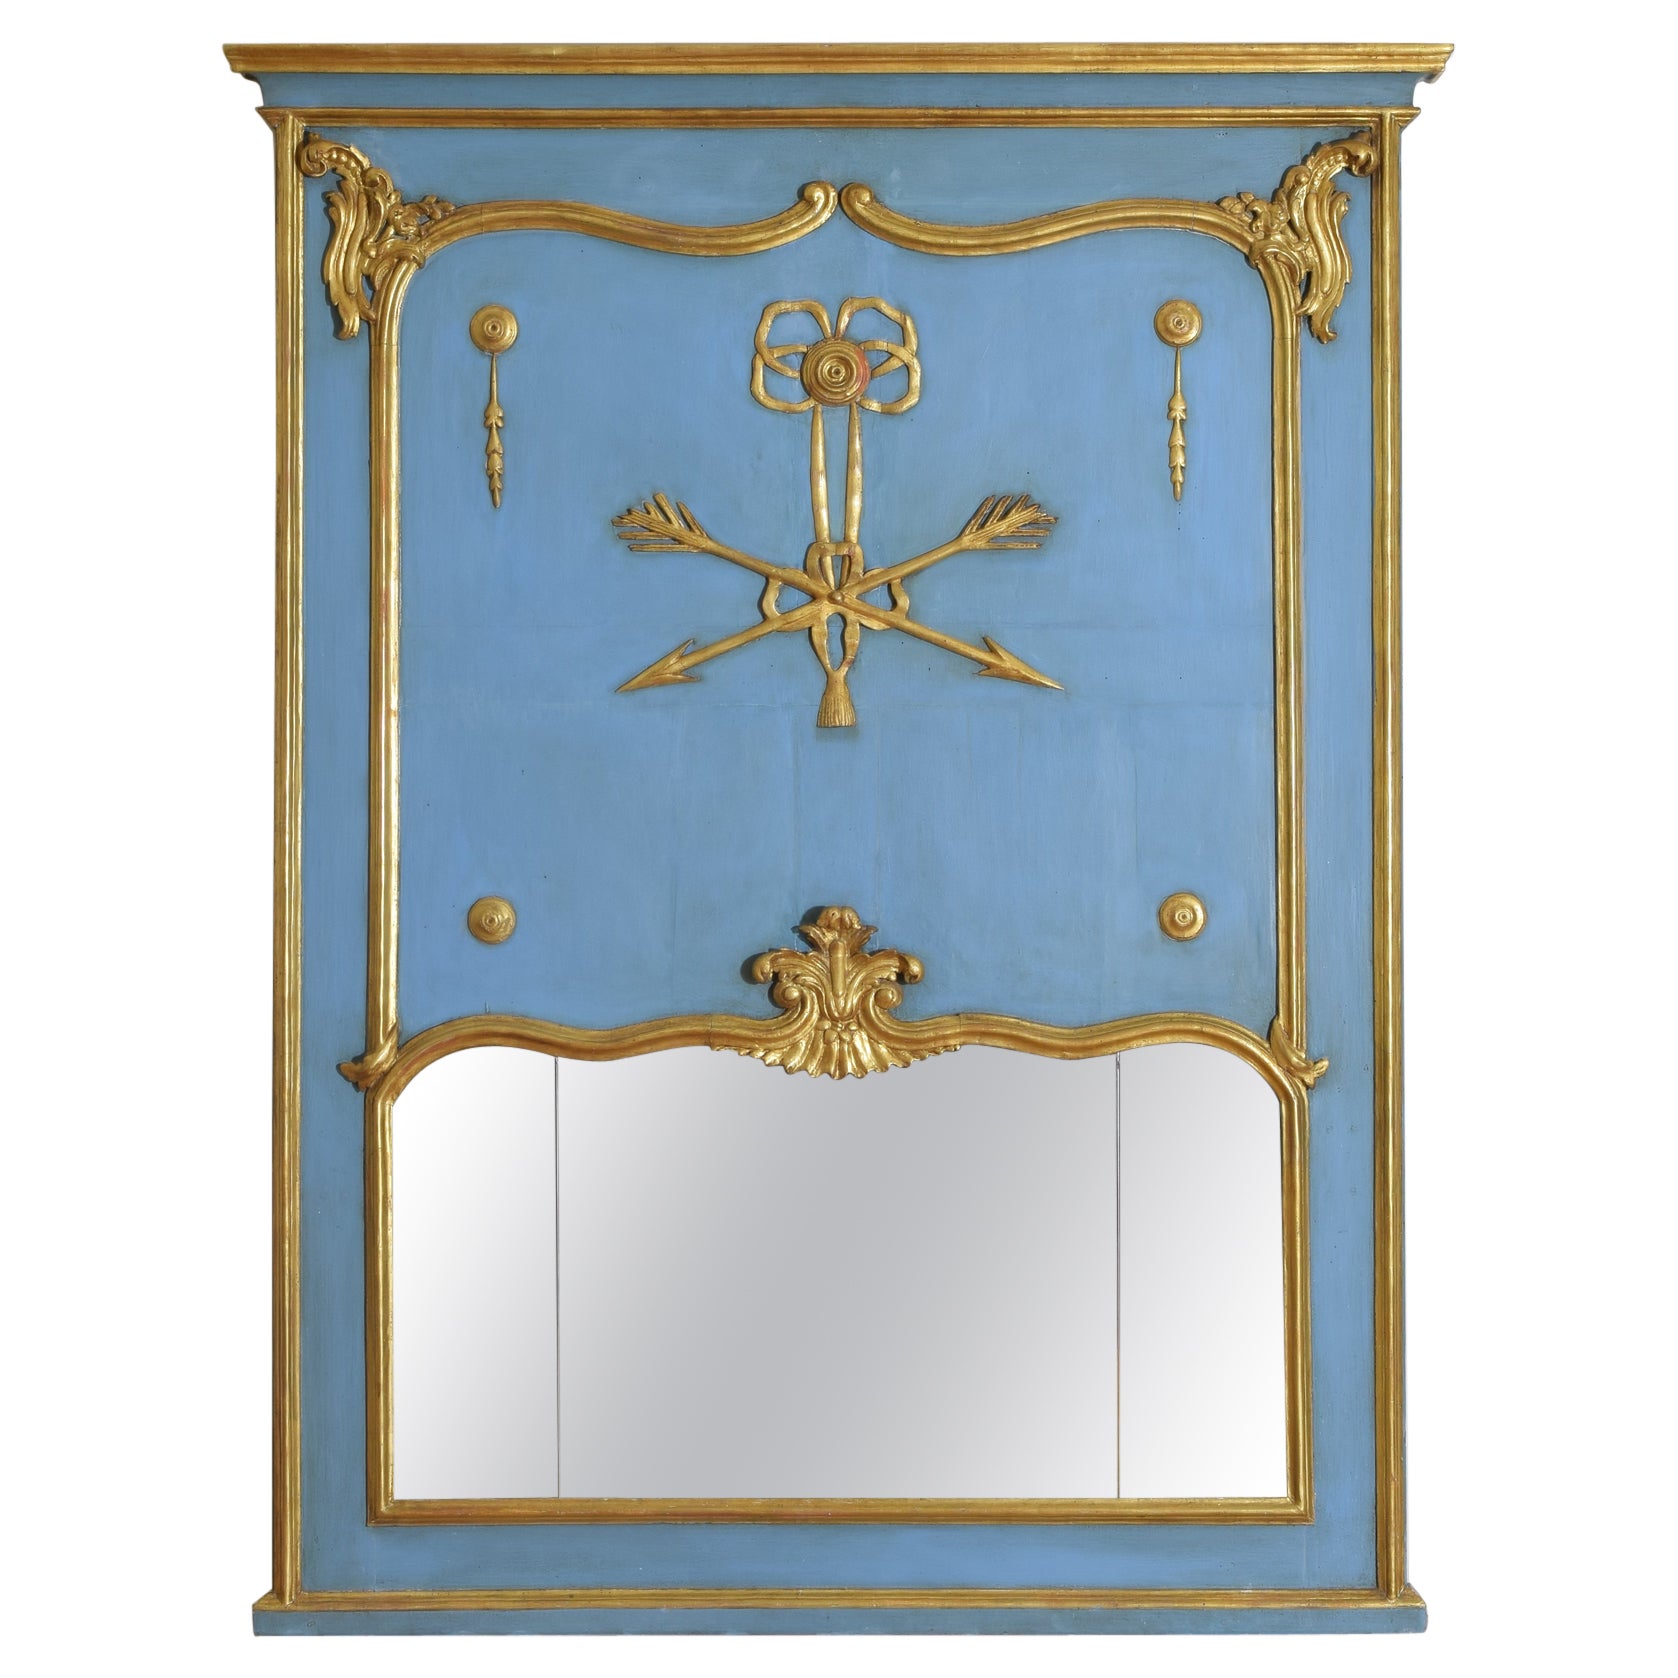 3rd Quarter 19th Century Blue Painted and Giltwood Trumeau Mirror